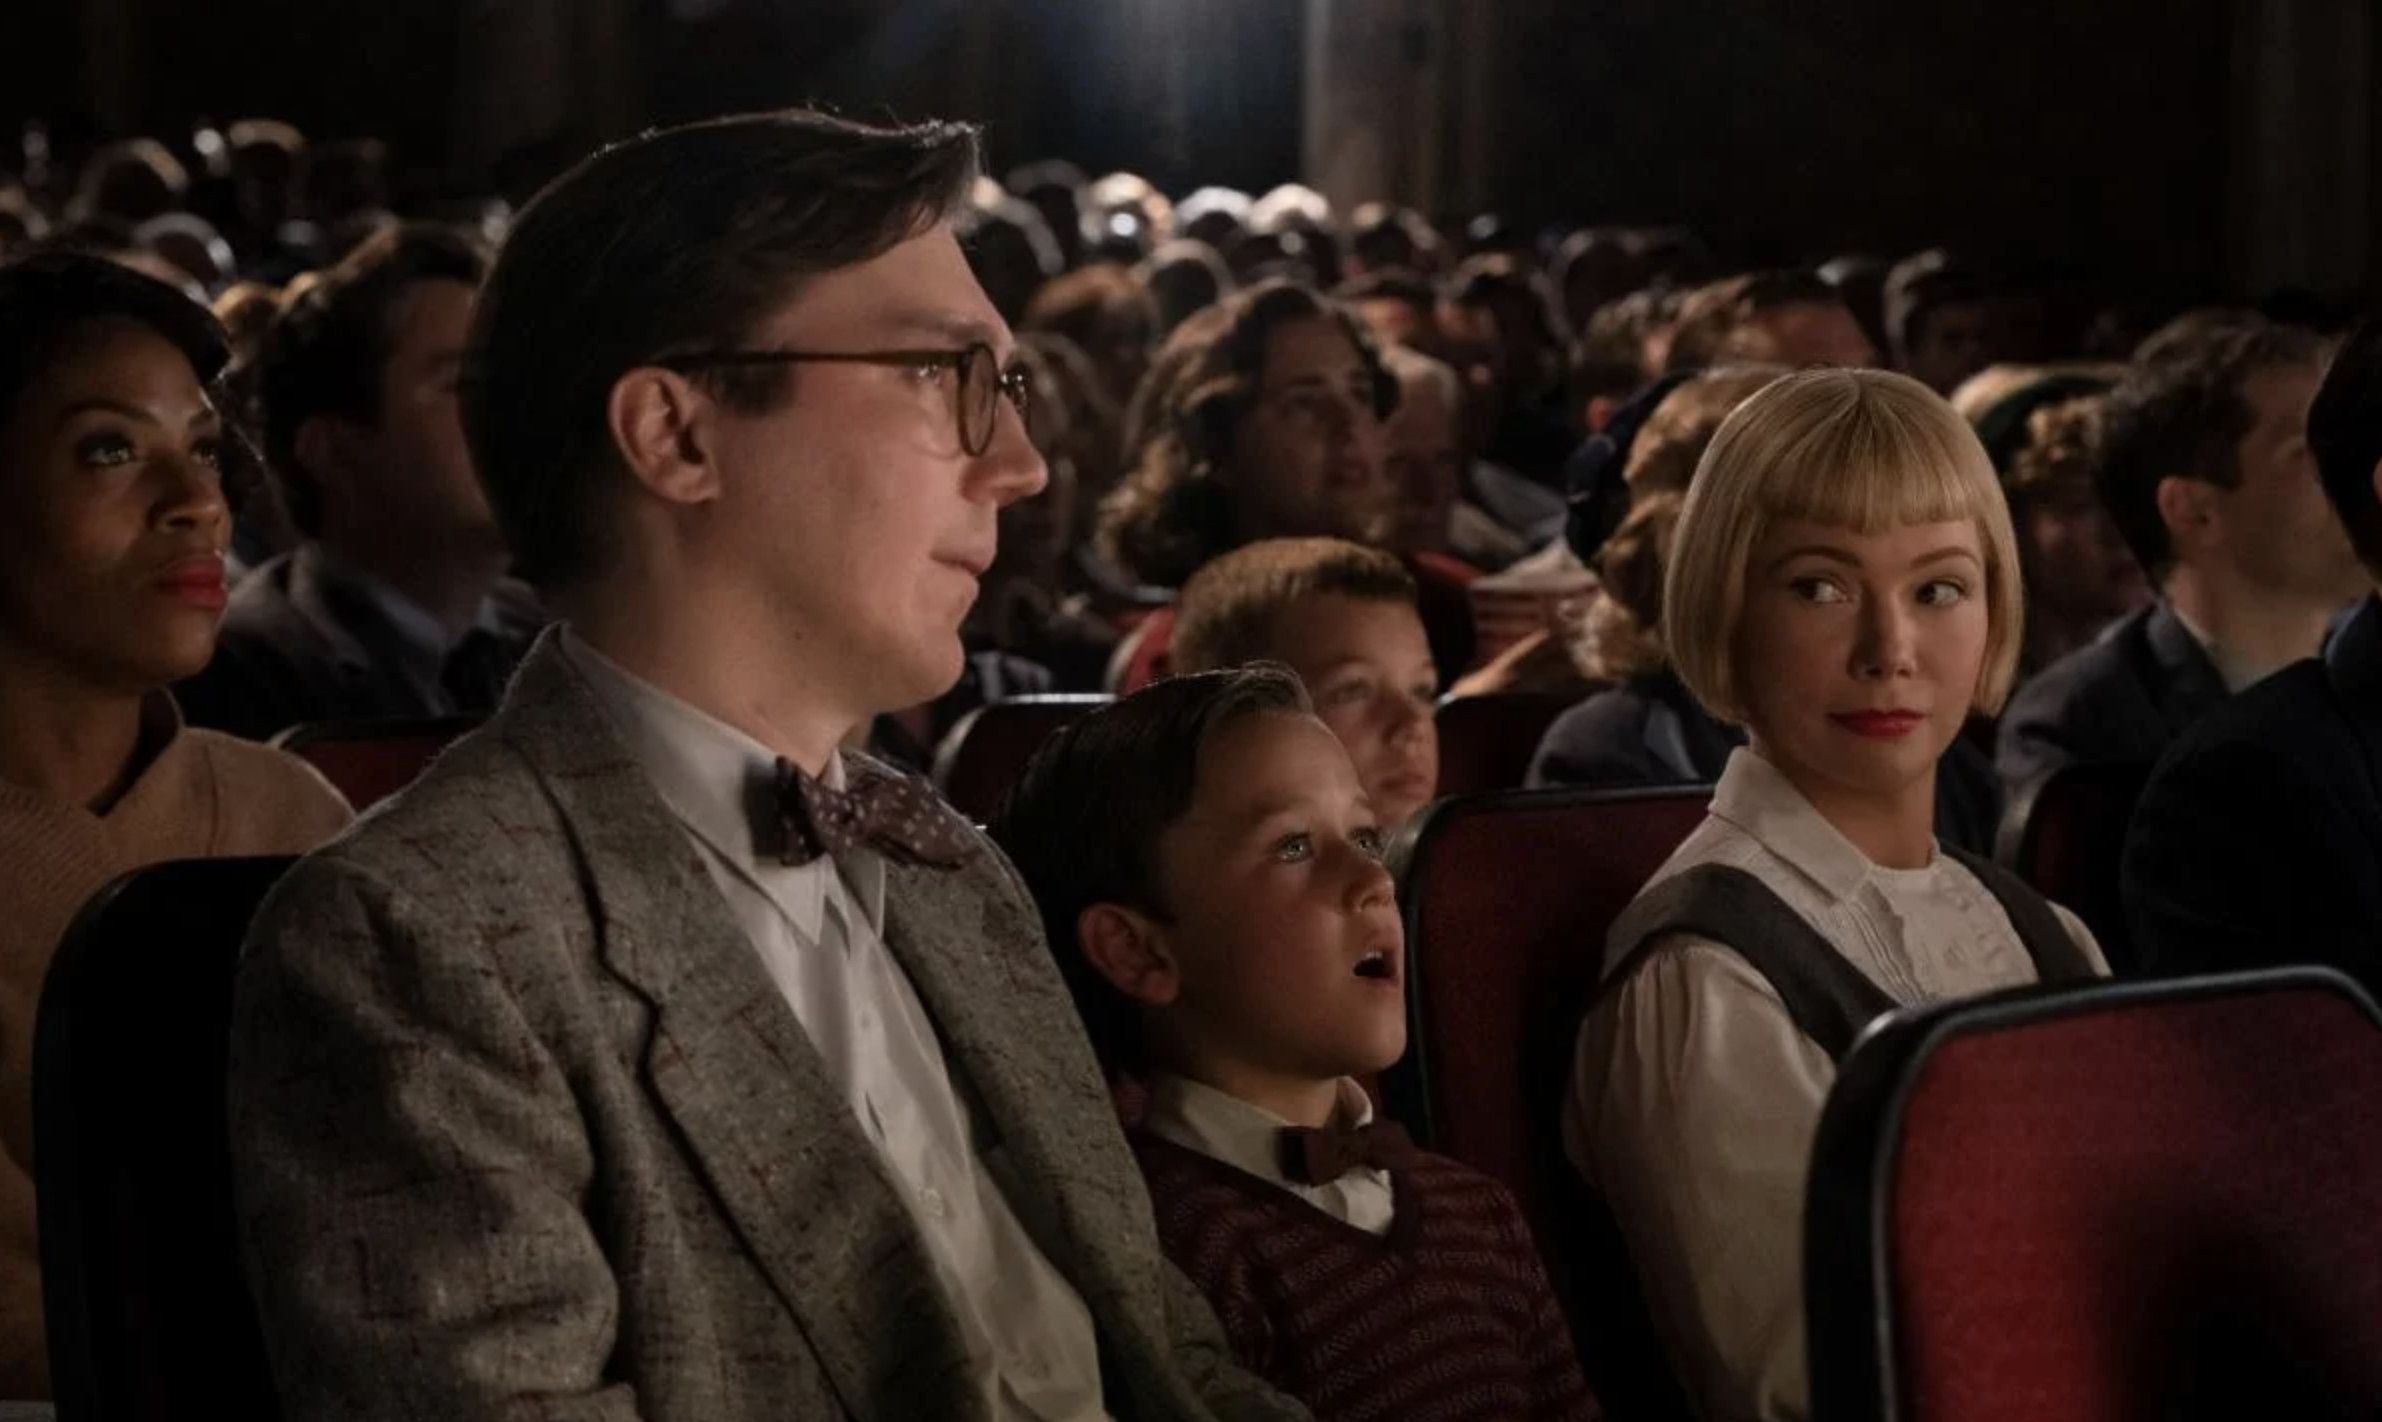 Paul Dano, Mateo Zoryon Francis-DeFord and Michelle Williams in &#039;The Fabelmans&#039; (2022)